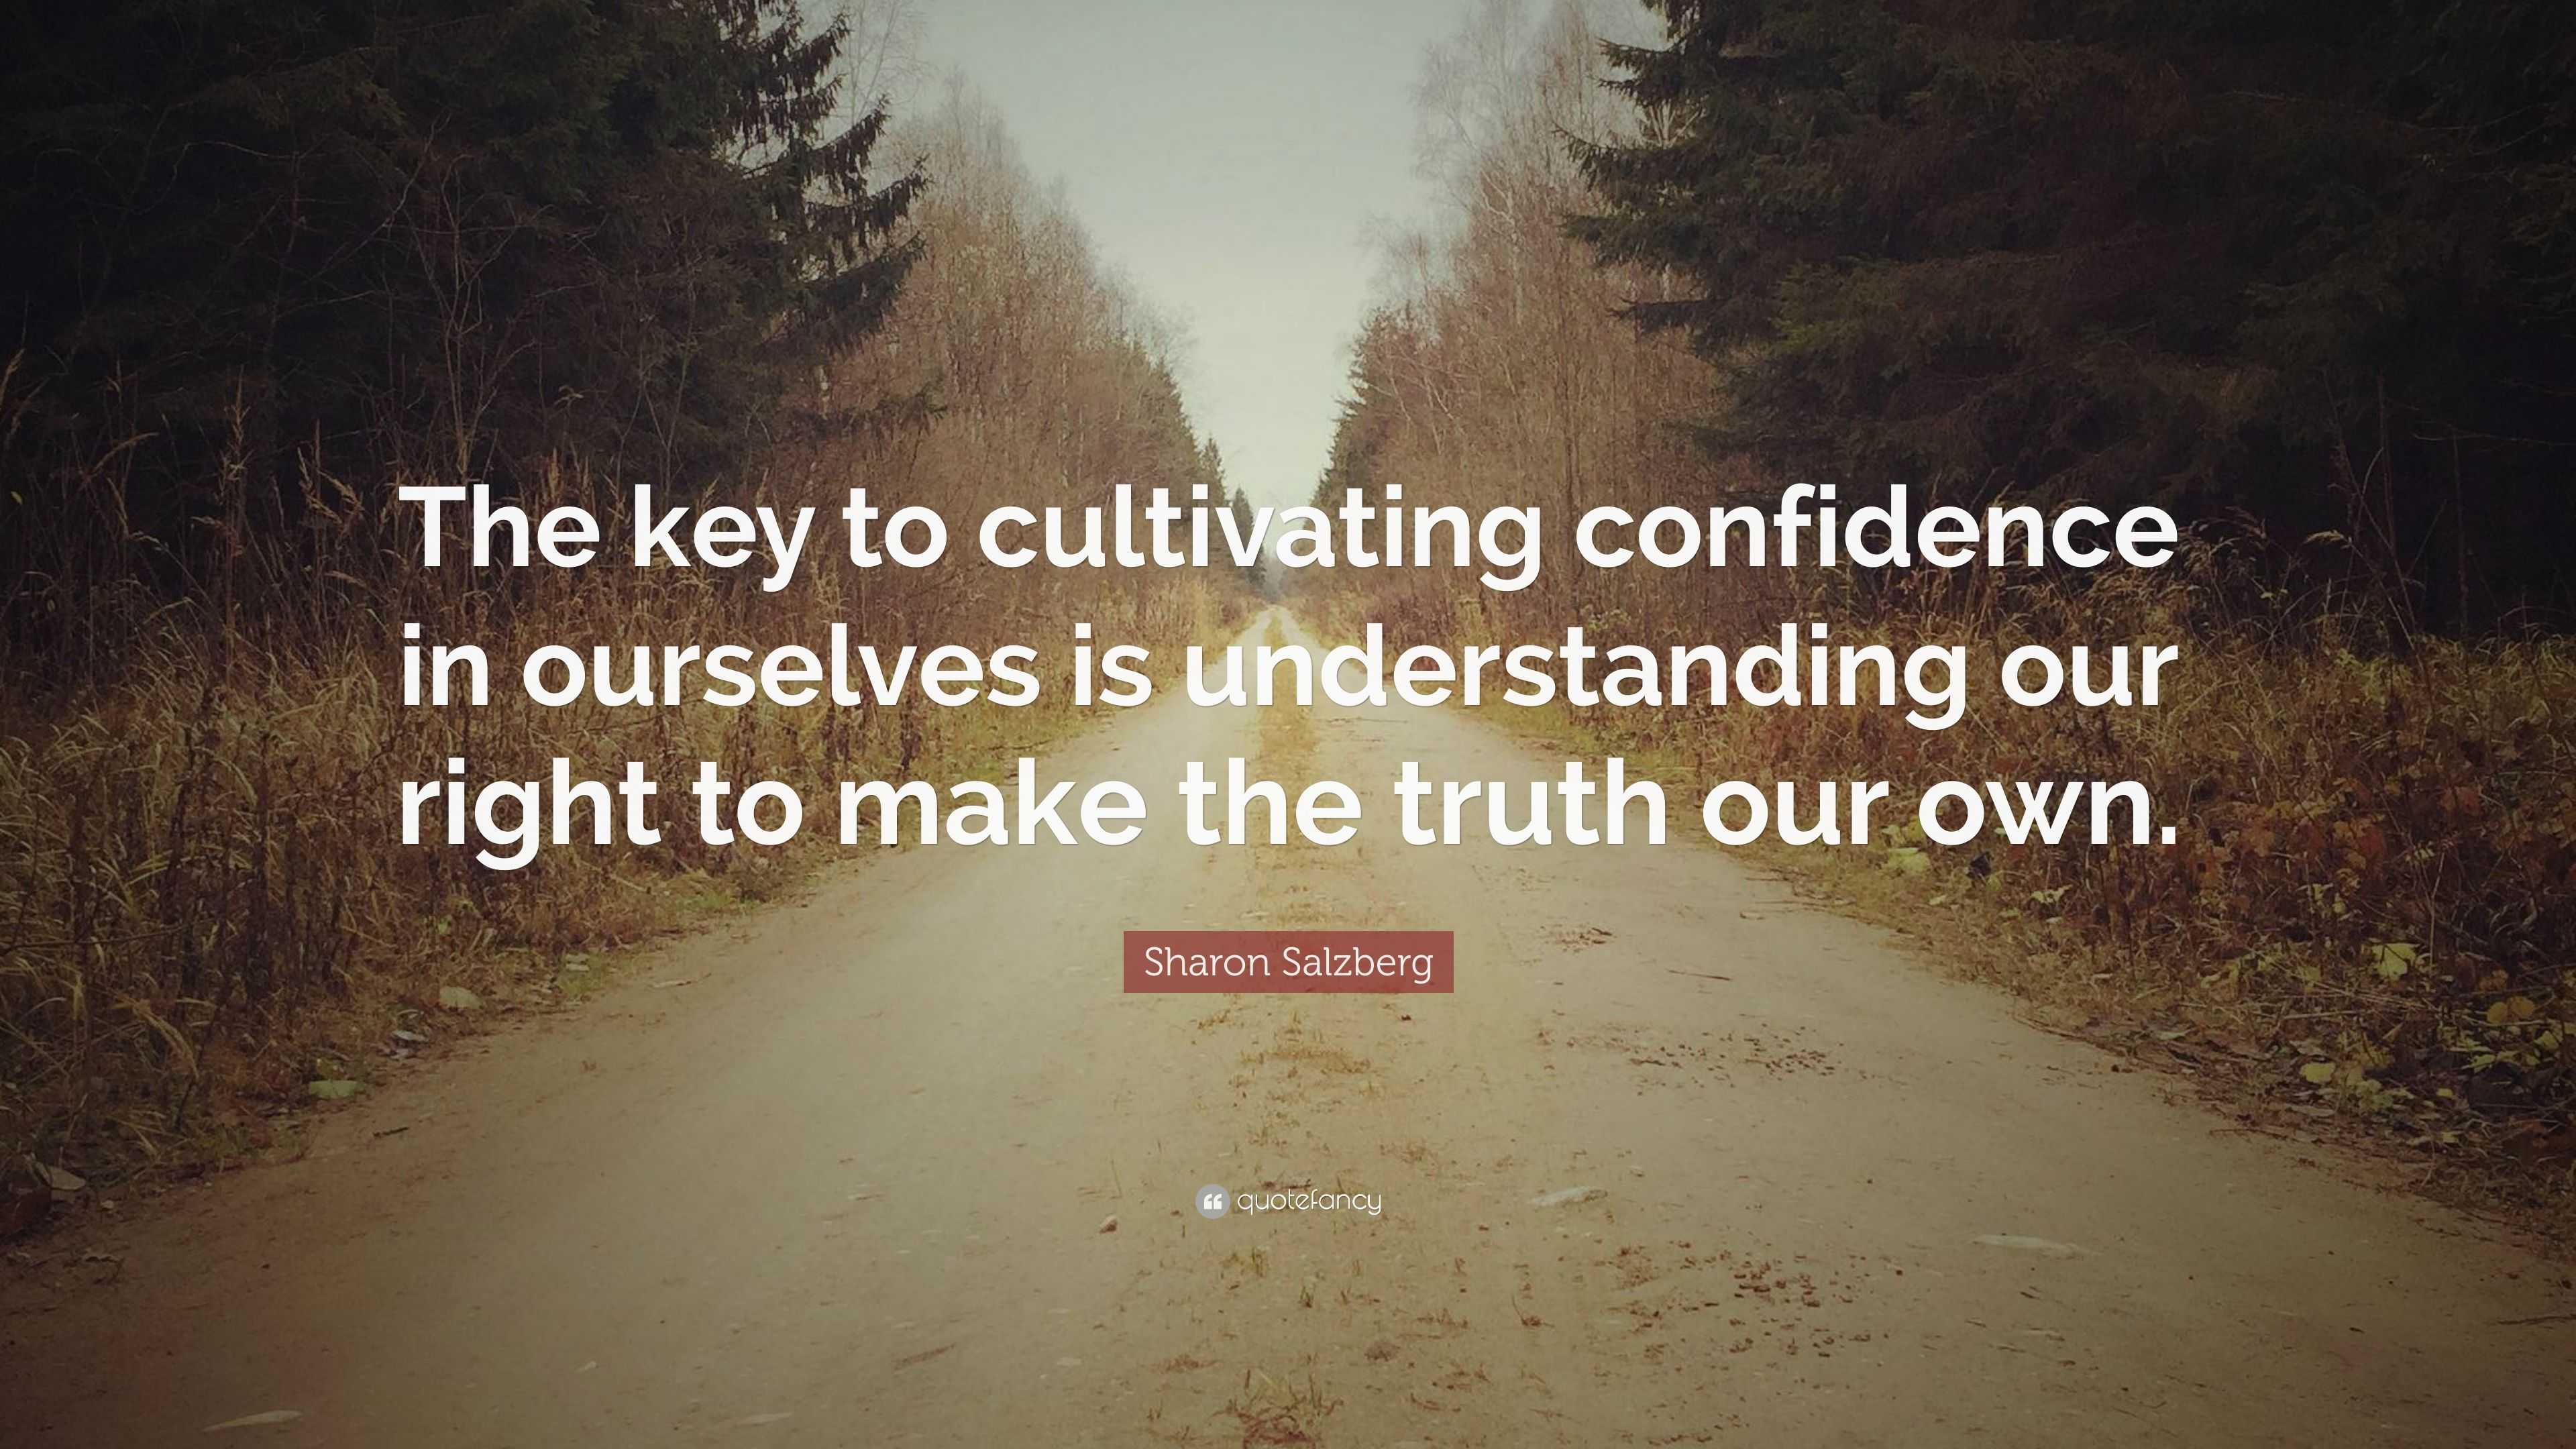 Sharon Salzberg Quote: “The key to cultivating confidence in ourselves ...